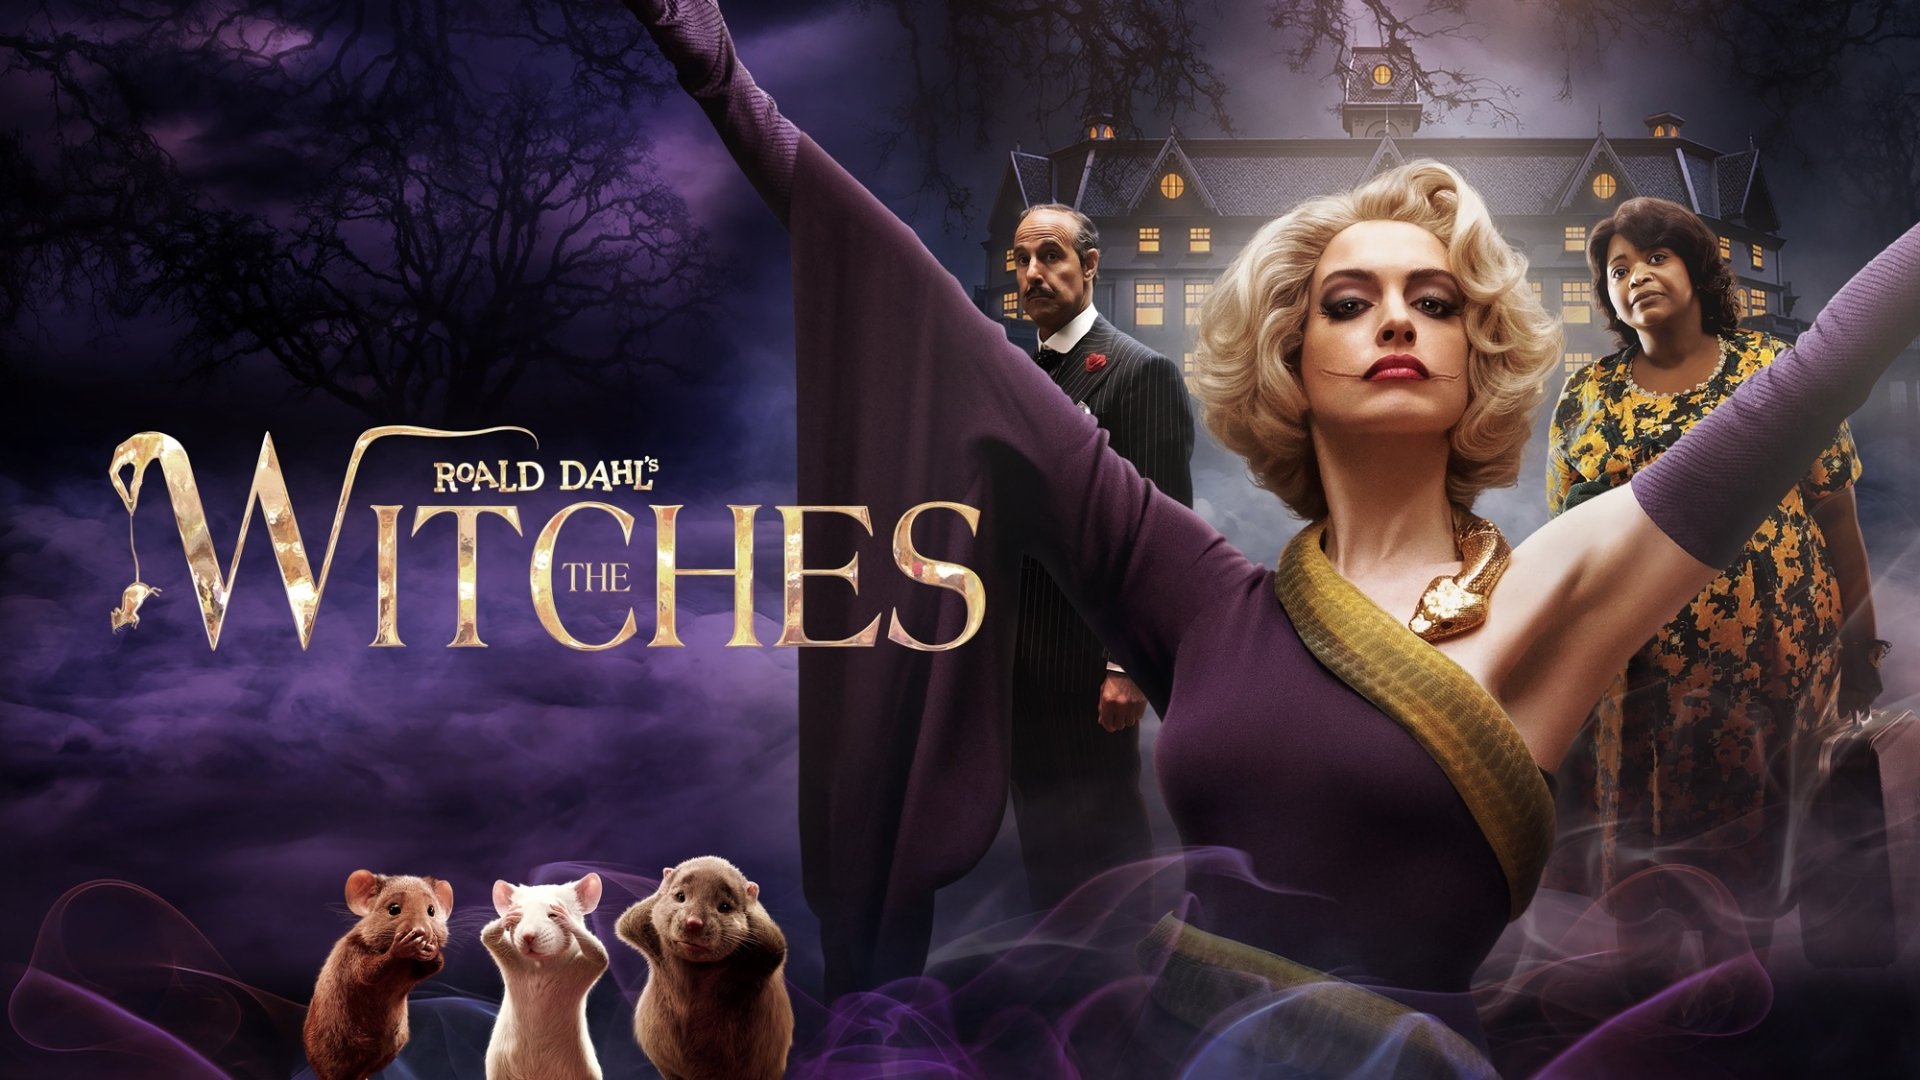 Movie The Witches 2020 Hd Wallpaper